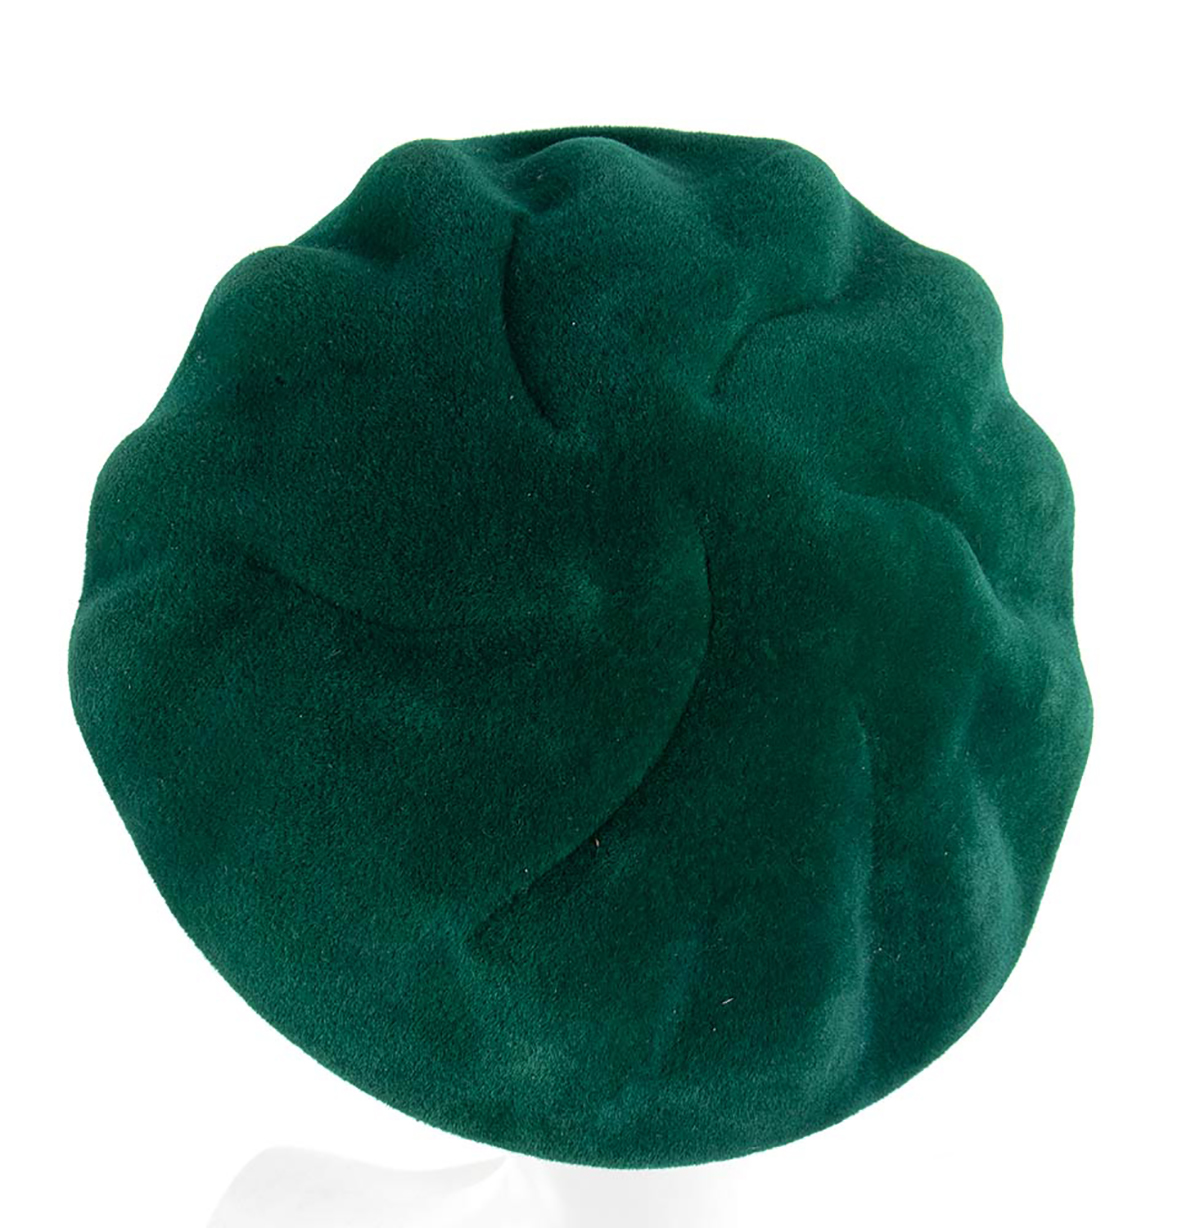 CHRISTIAN DIOR (LICENCE COPY) WOOL HAT 60s Green wool hat. General conditions grading B - Image 2 of 3